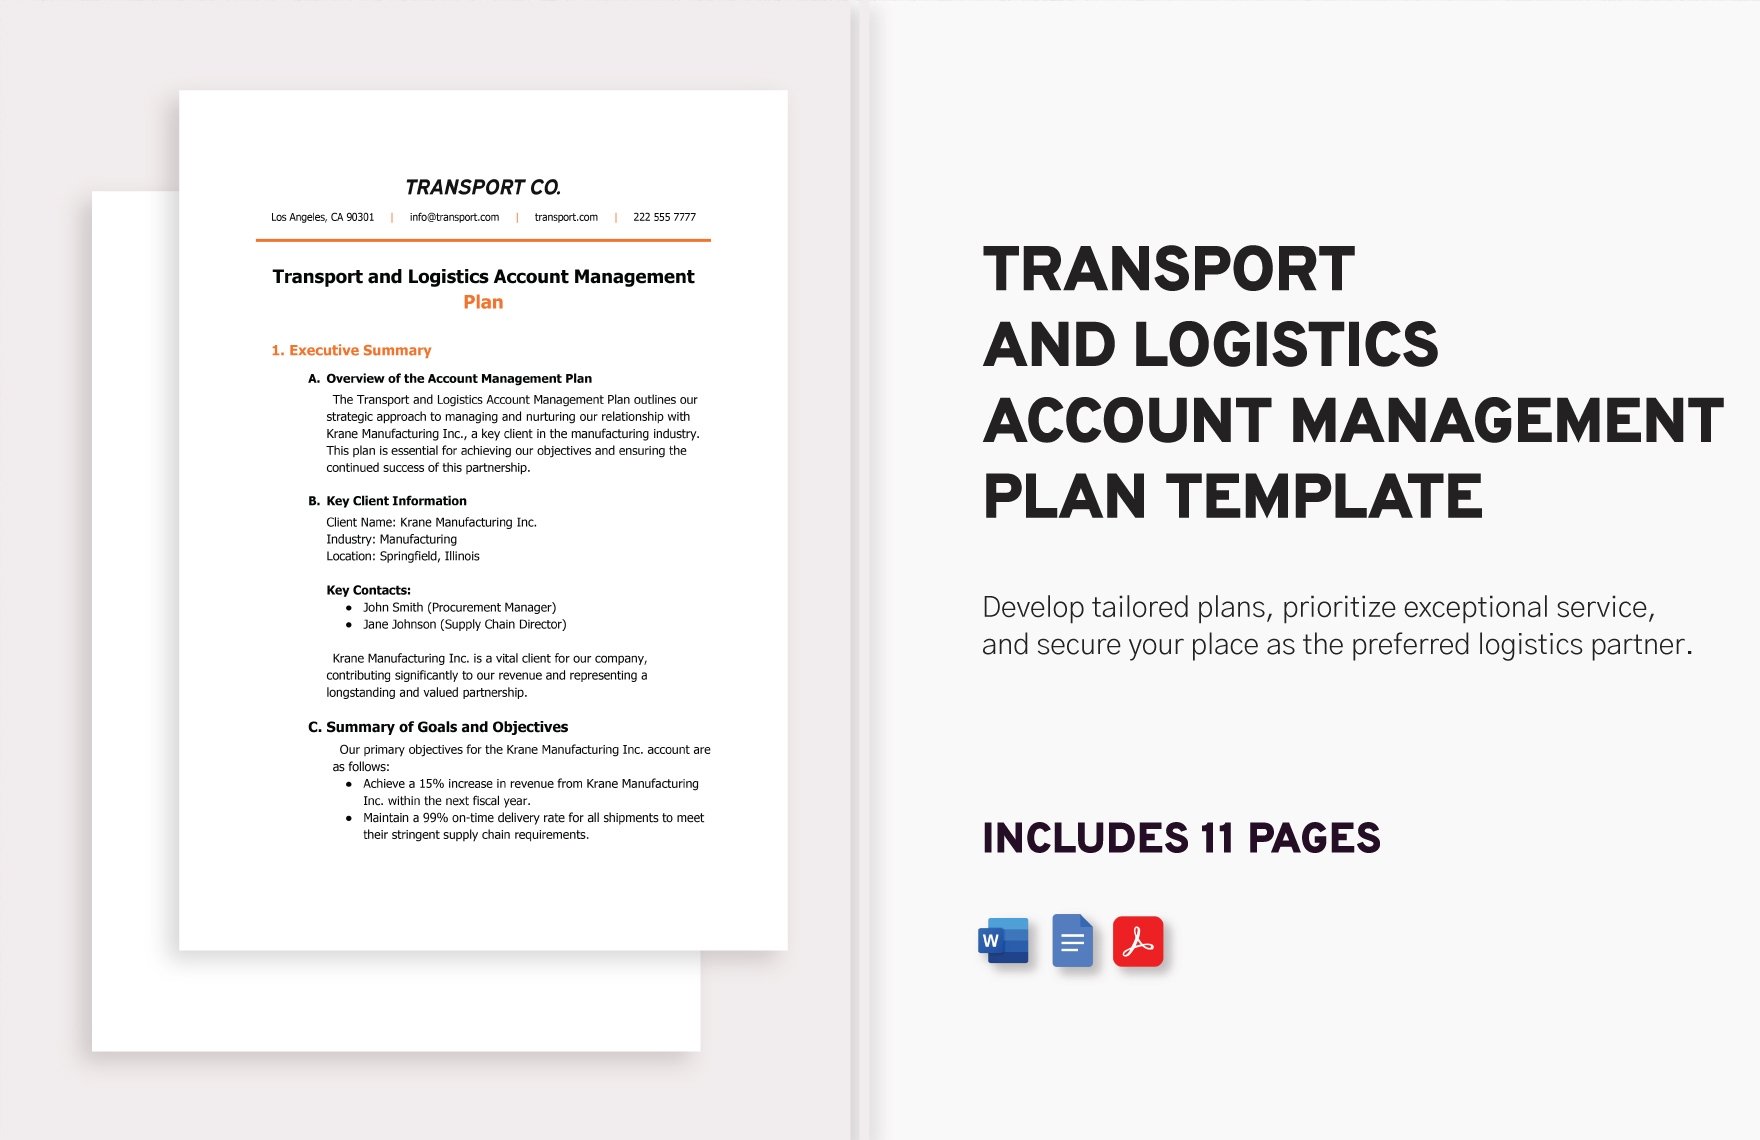 Transport and Logistics Account Management Plan Template in Word, Google Docs, PDF